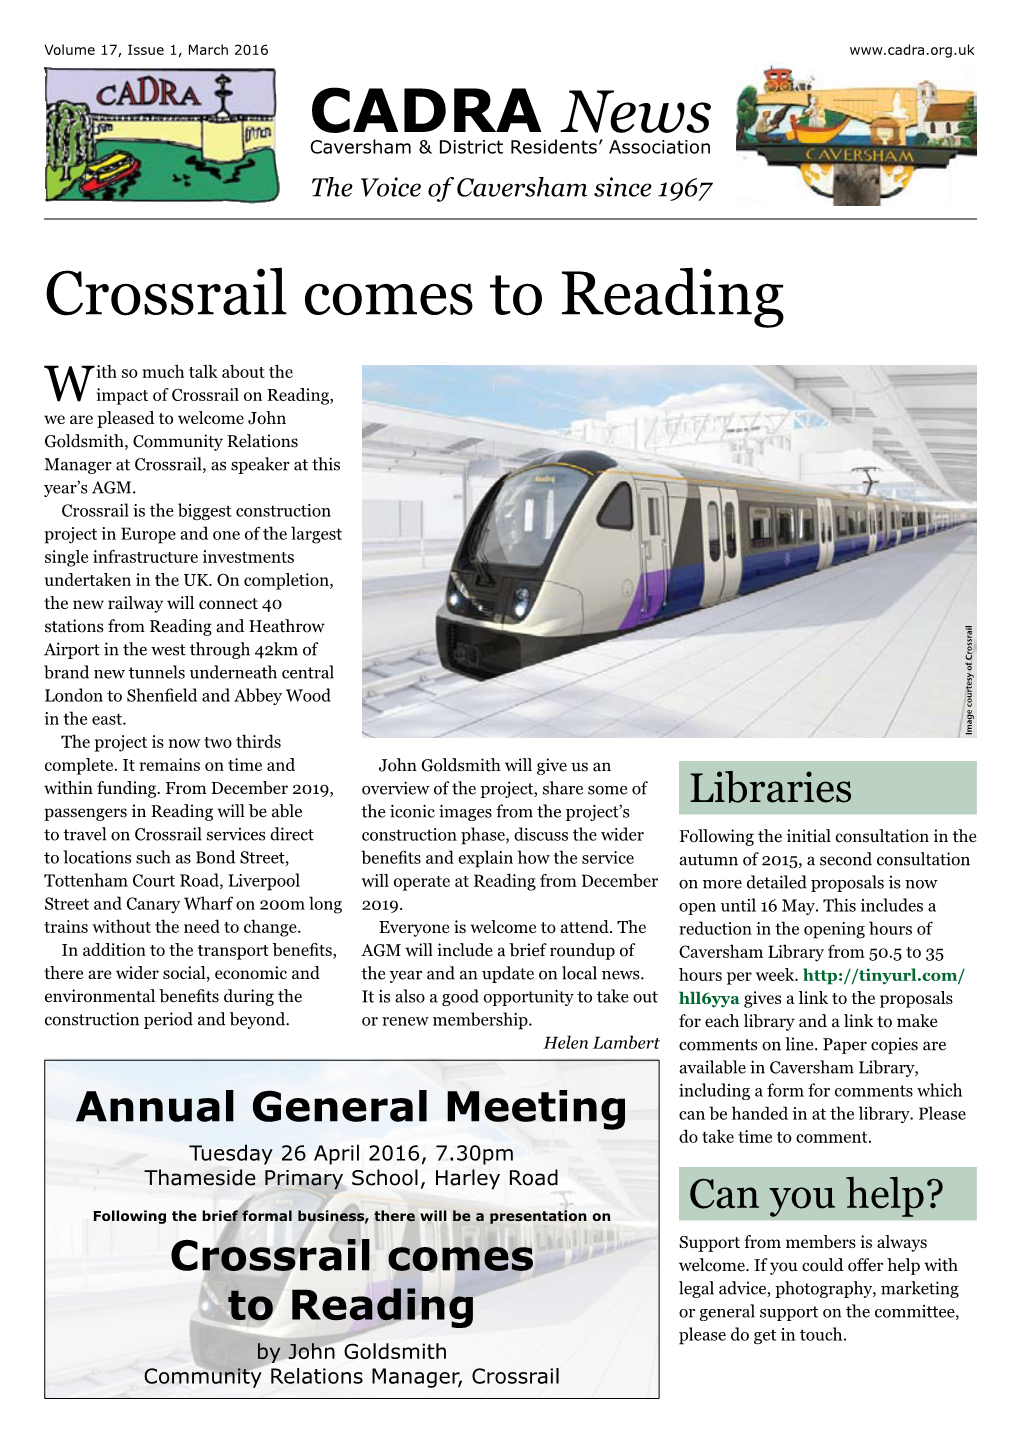 Crossrail Comes to Reading